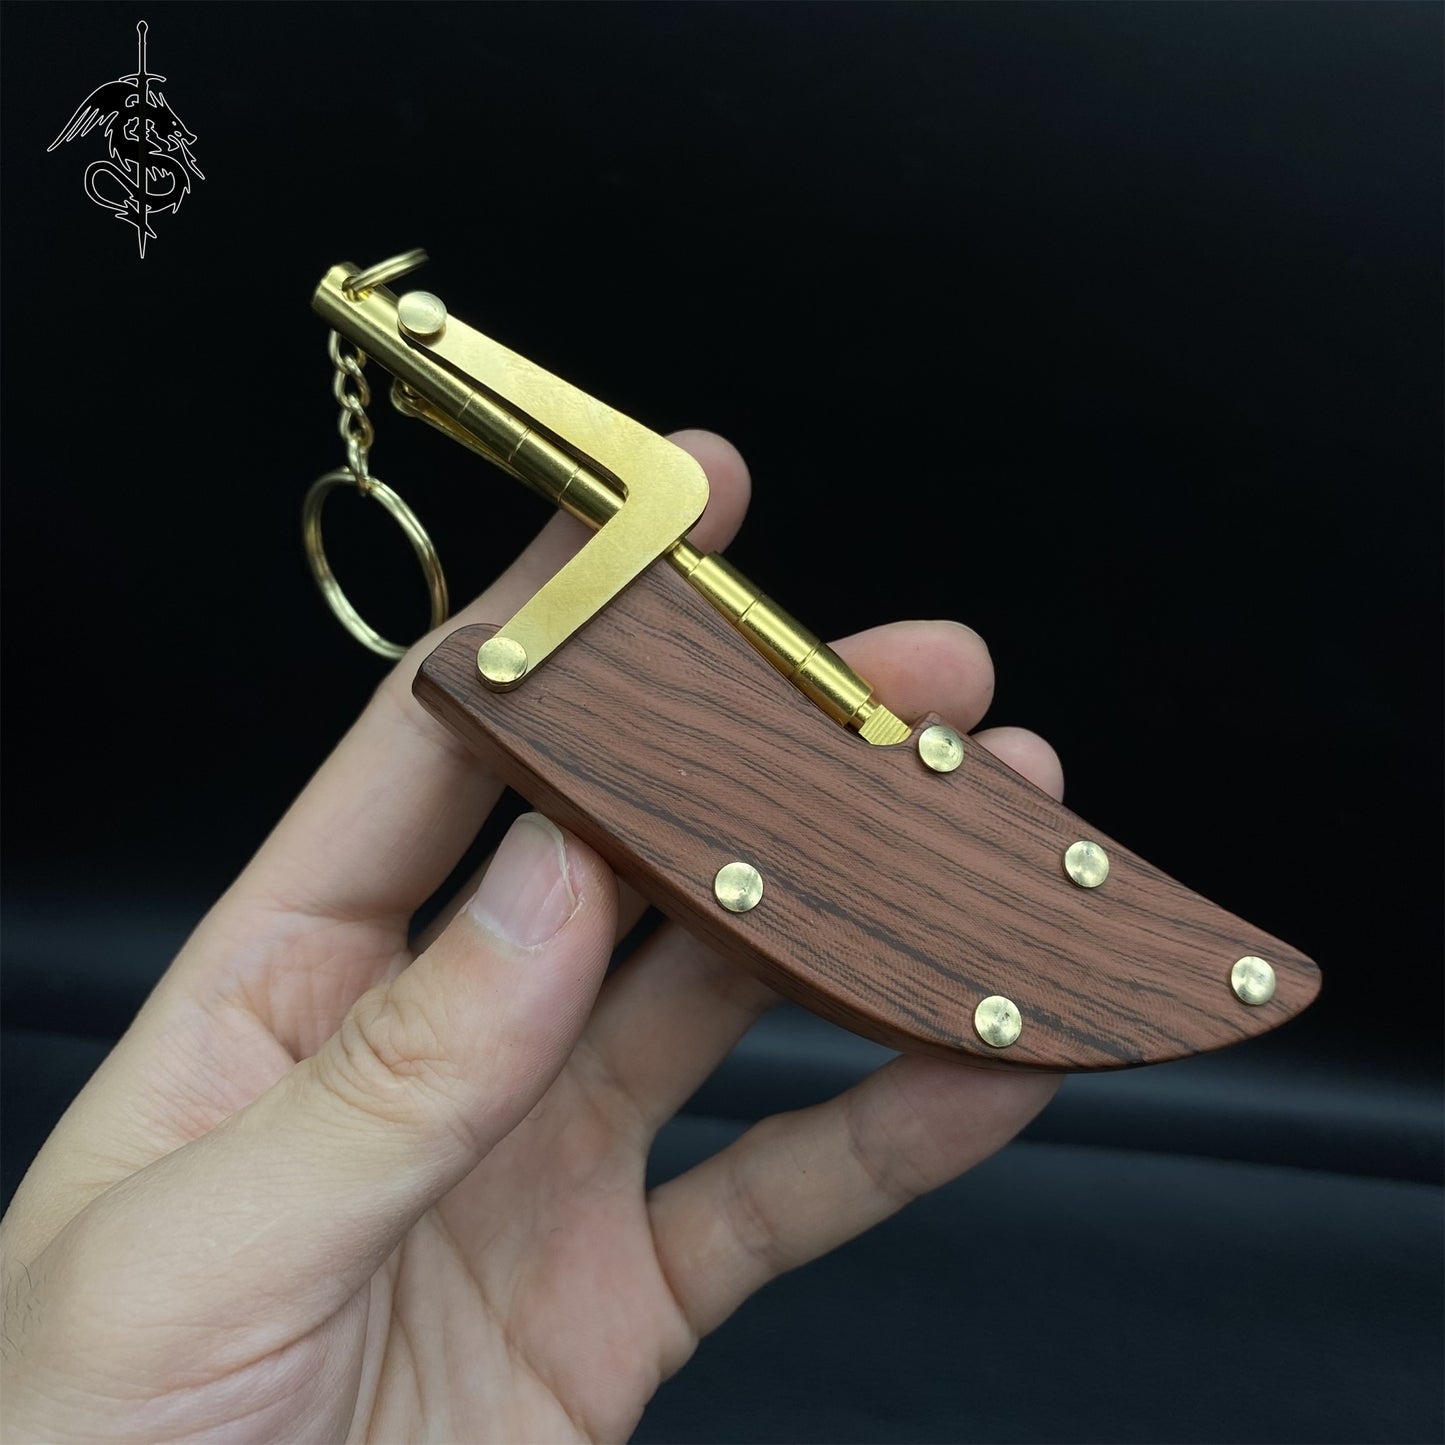 Creative EDC Outdoor Tool Unboxing Knife Keychain